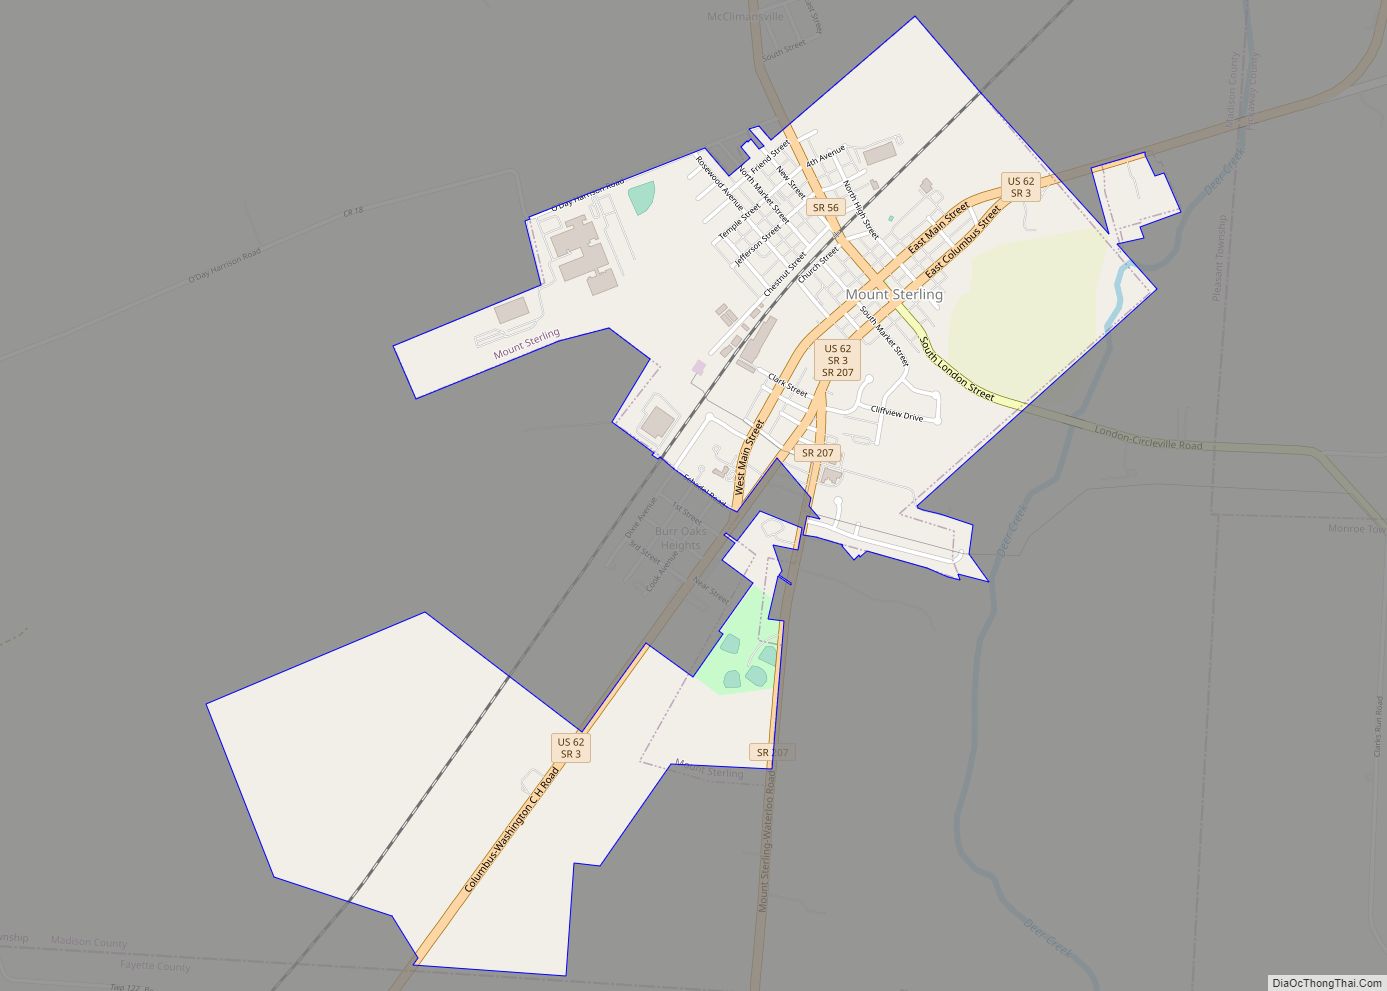 Map of Mount Sterling village, Ohio